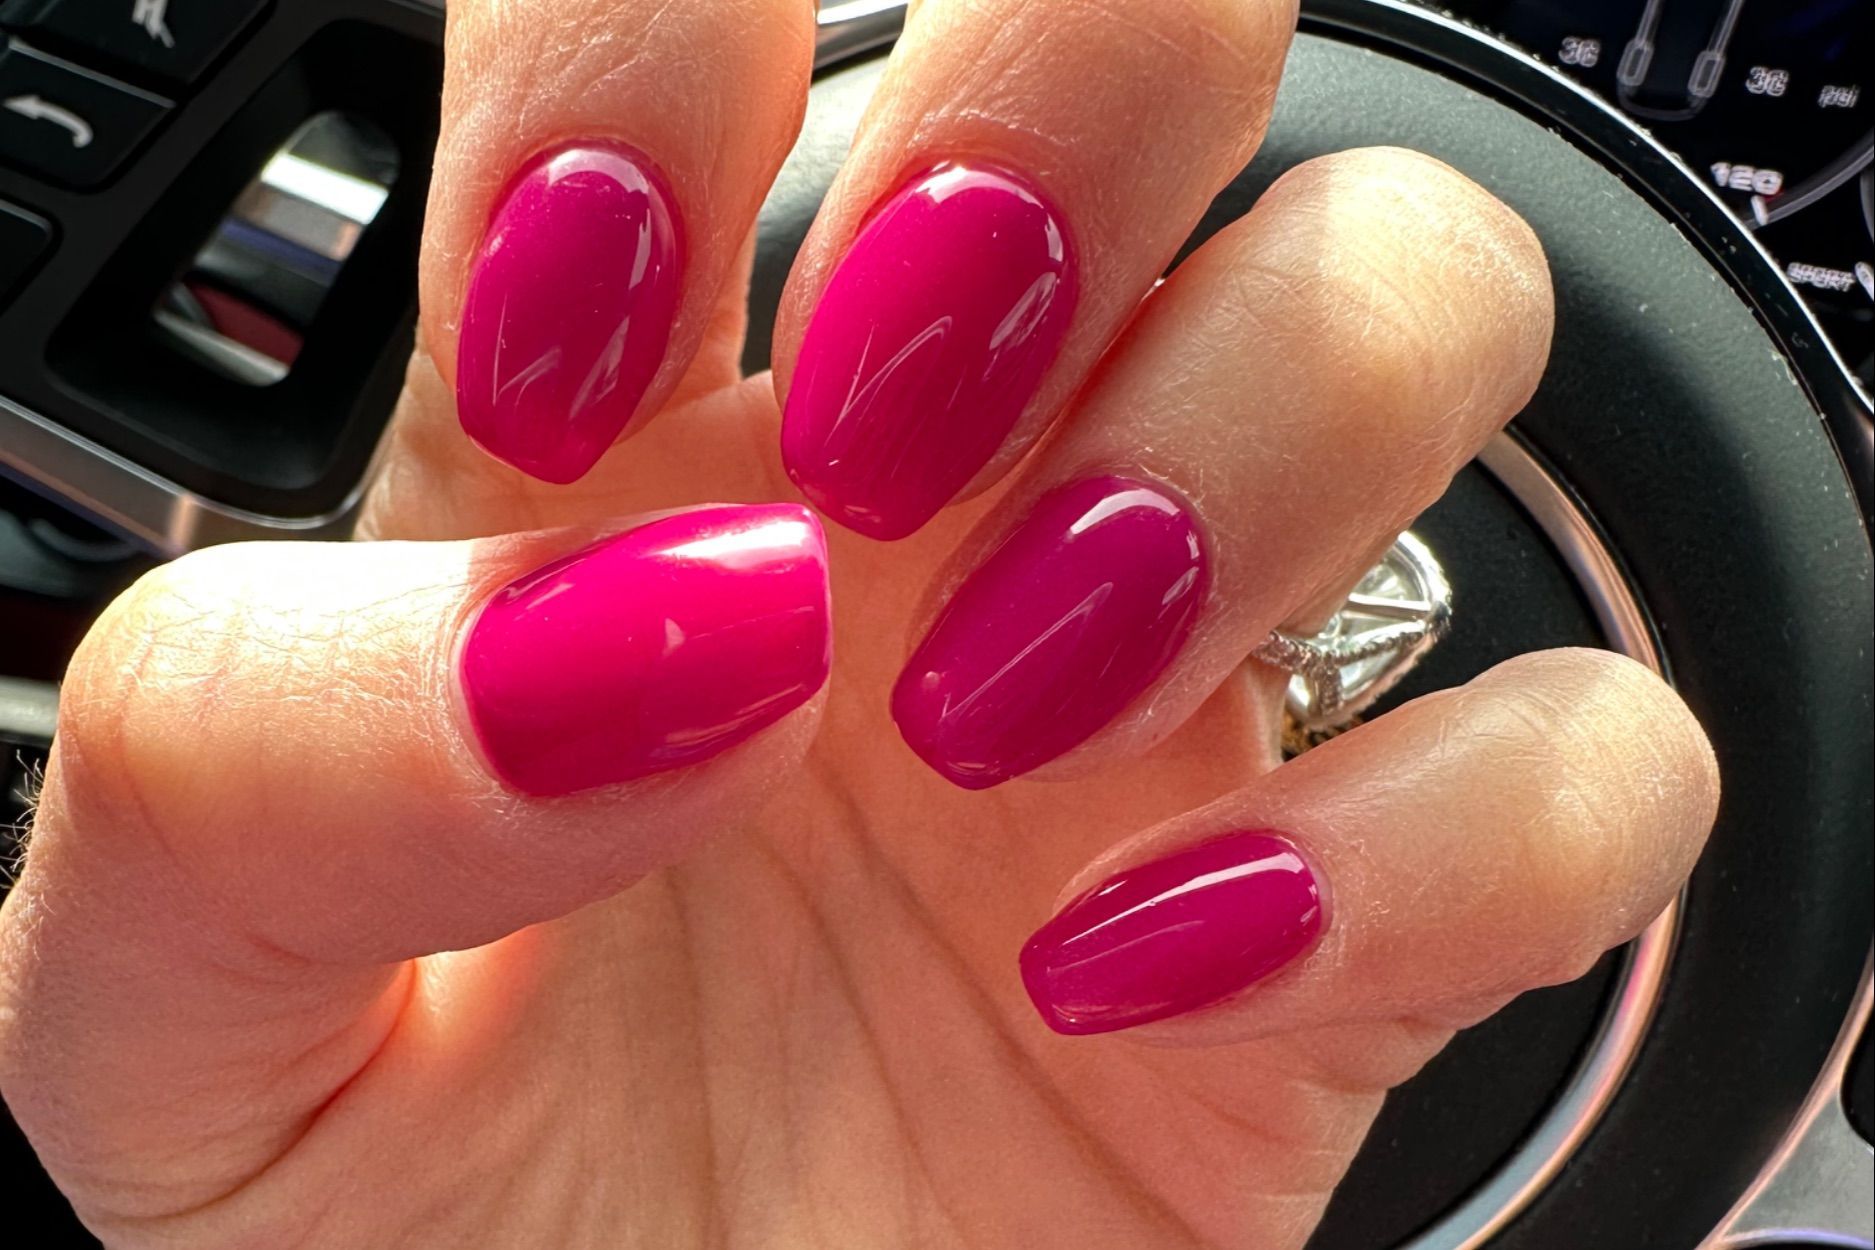 Bio Sculpture - Coupe Ongle